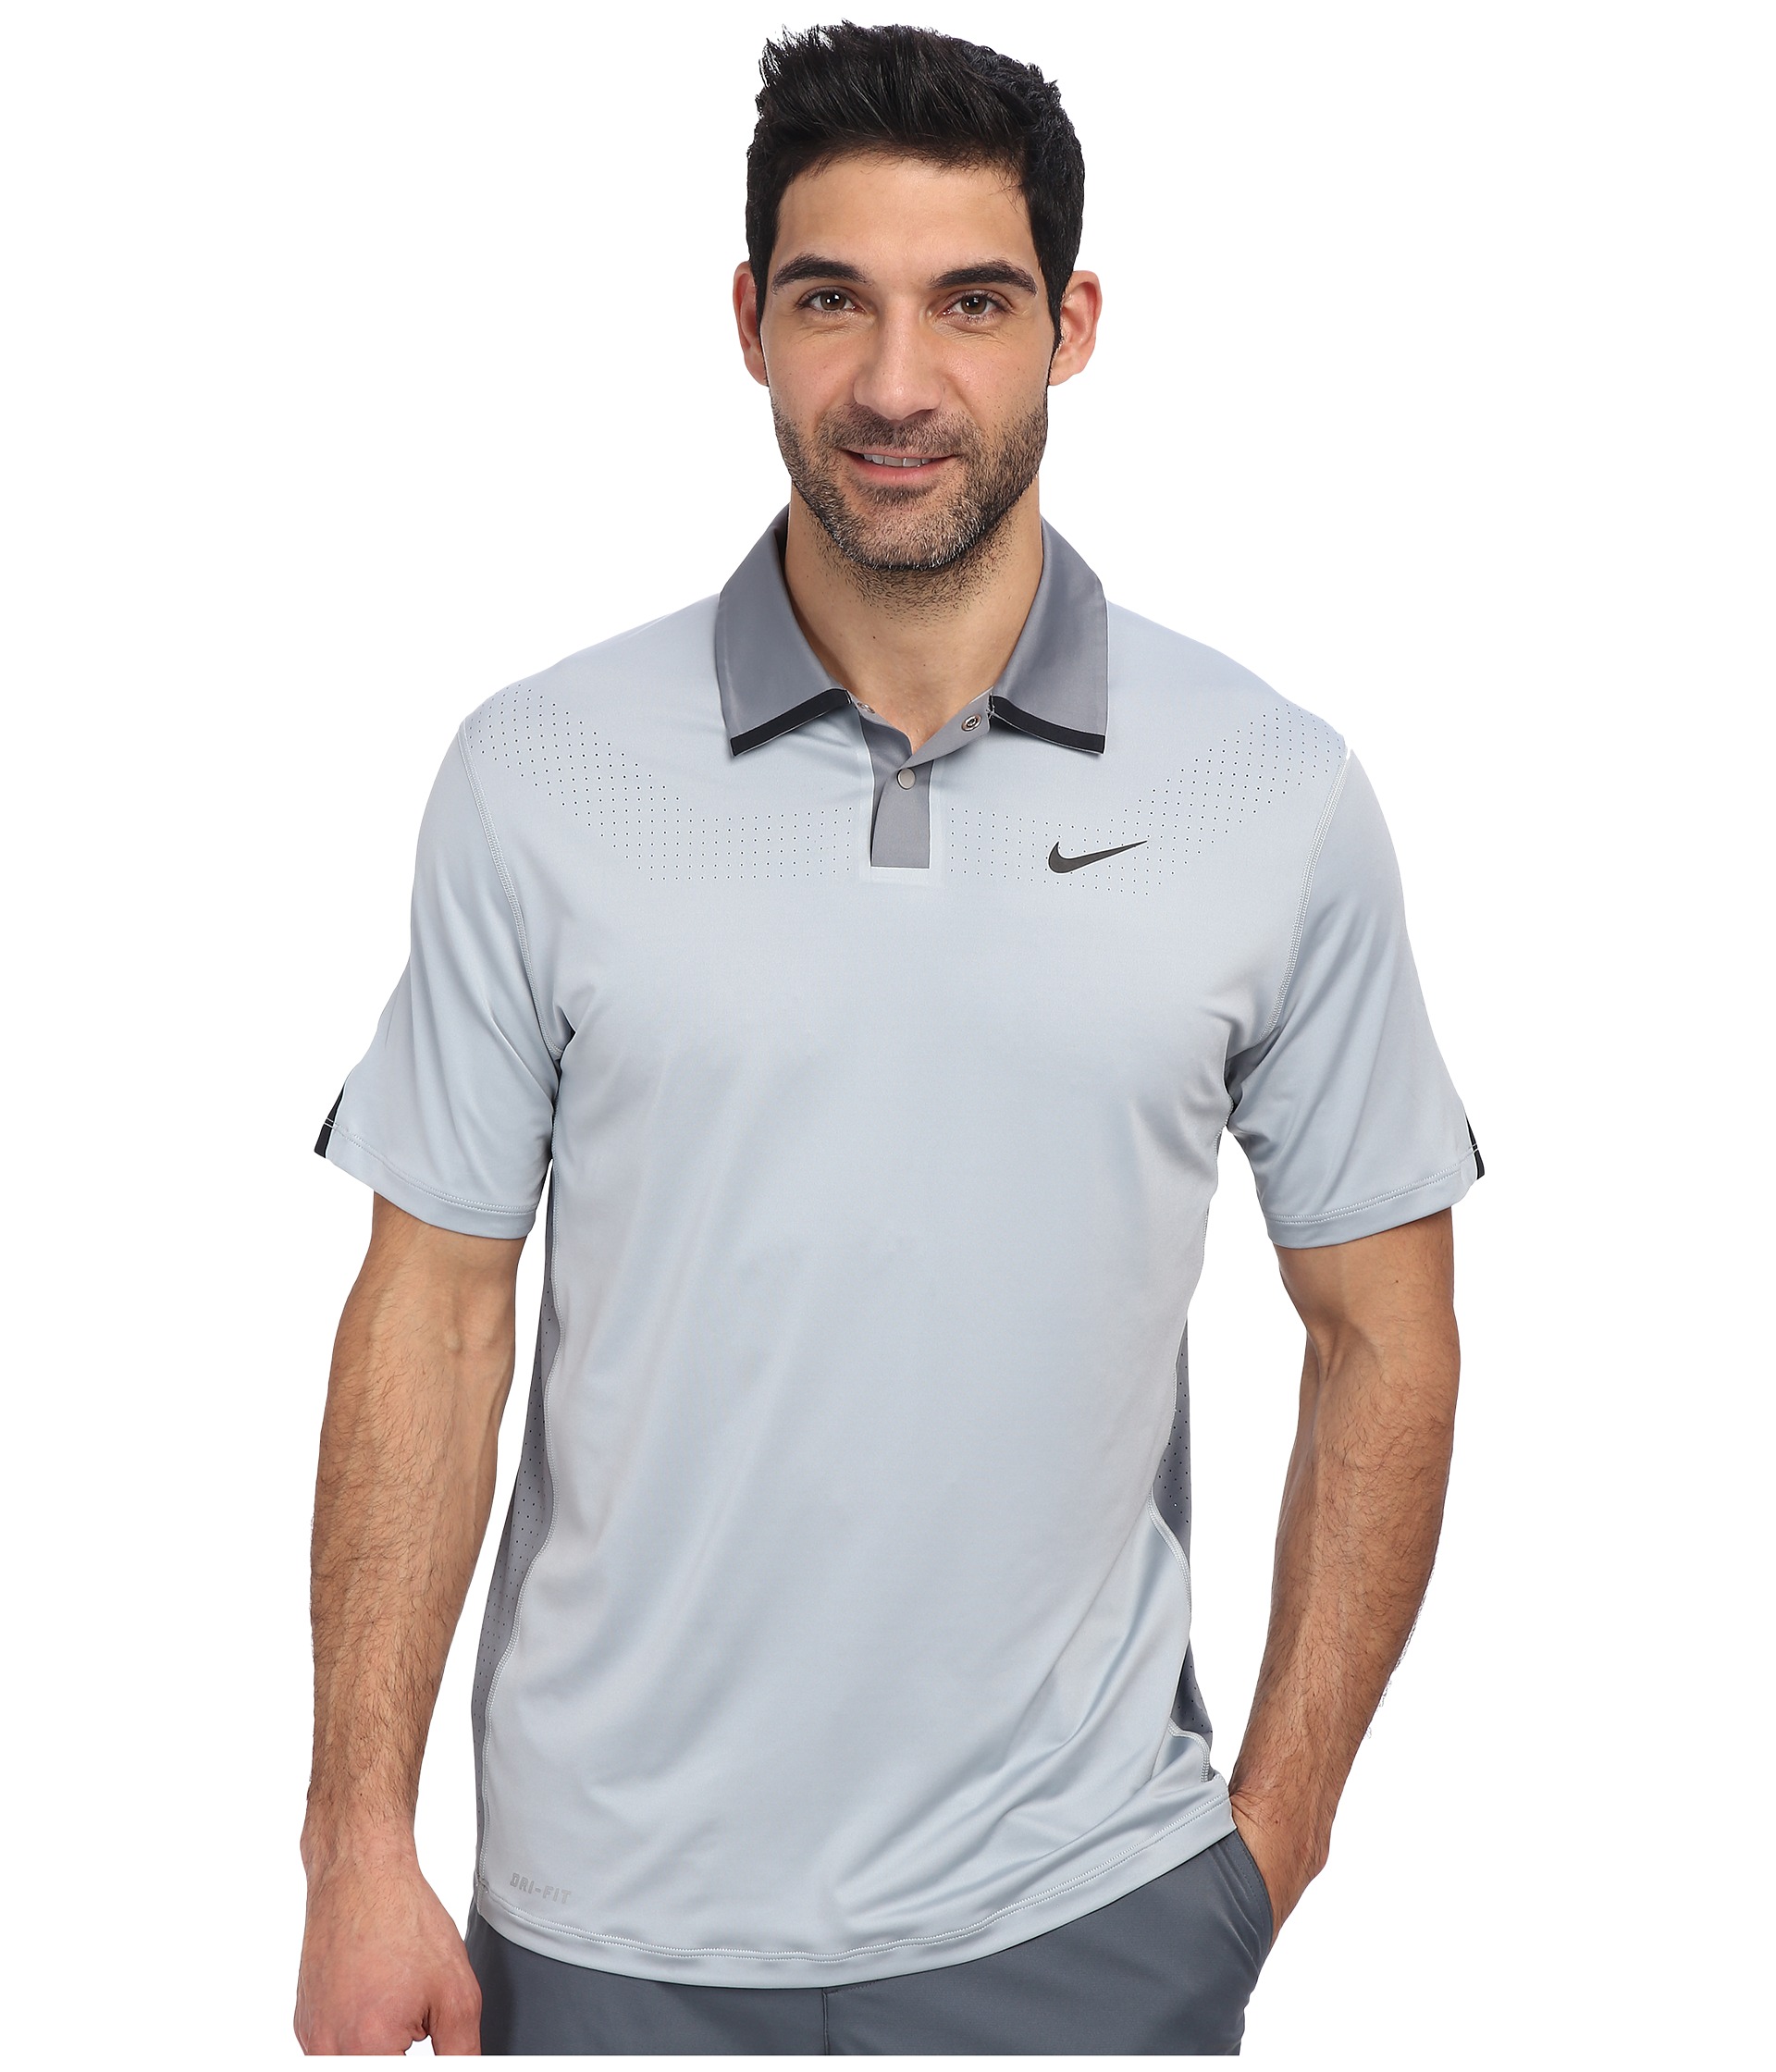 Nike Golf Tiger Woods Perforated Panel Polo | Shipped Free at Zappos